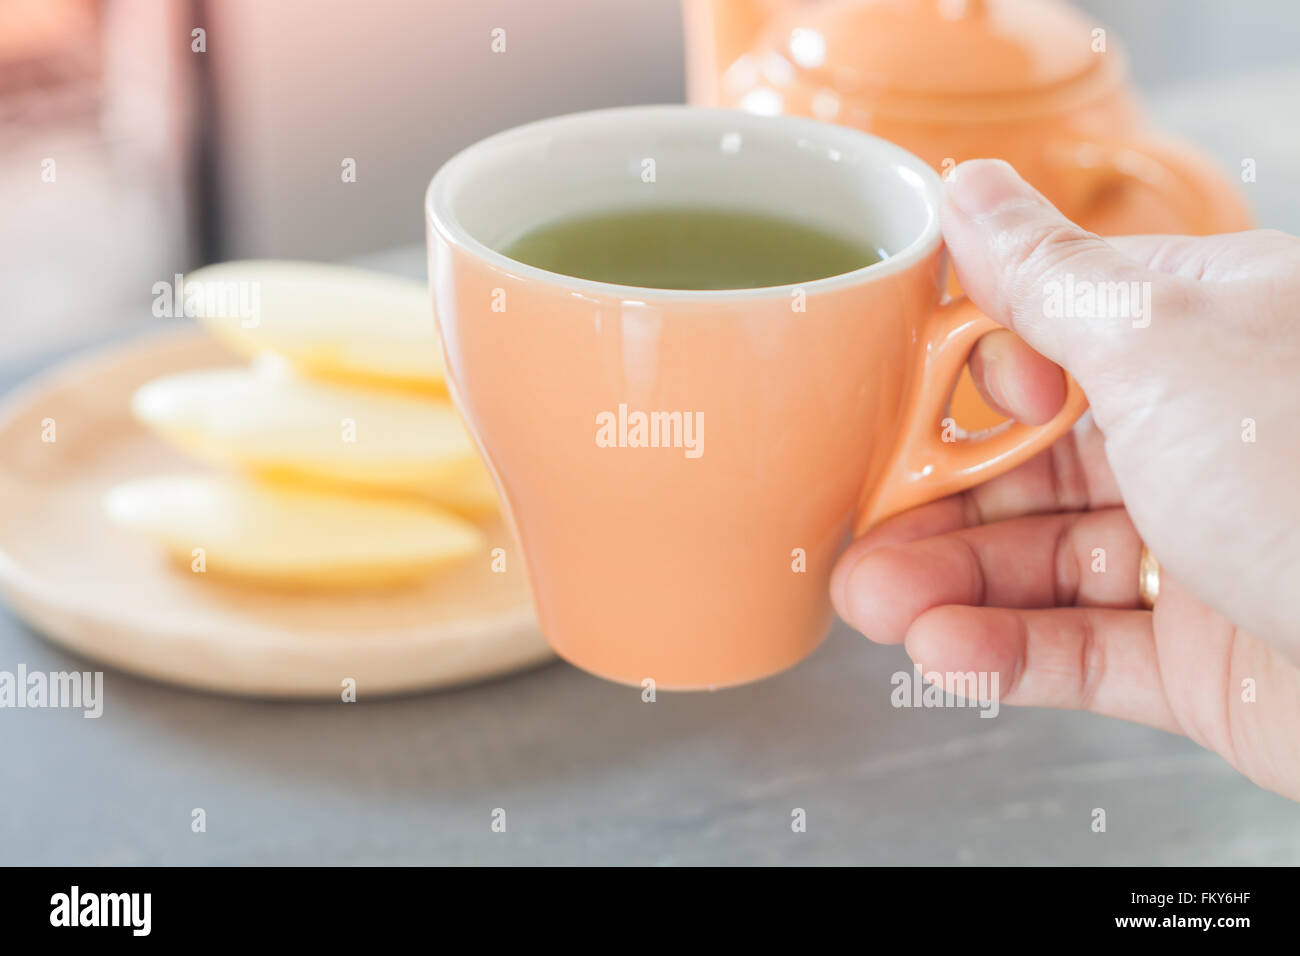 Cup of tea with traditional Thai cookies, stock photo Stock Photo